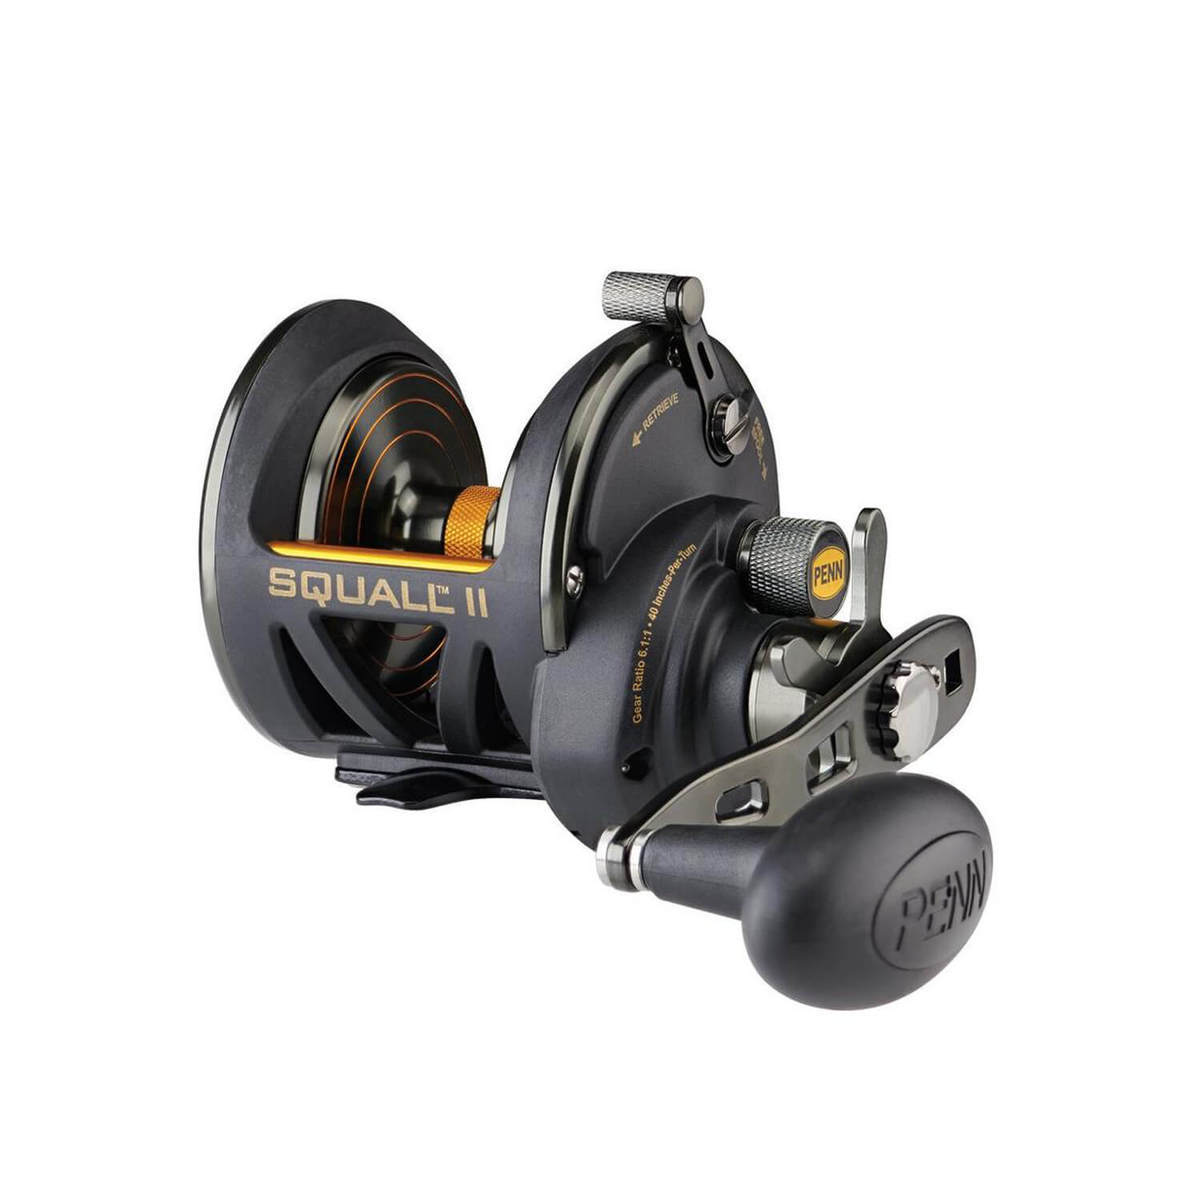 lever drag trolling reel, lever drag trolling reel Suppliers and